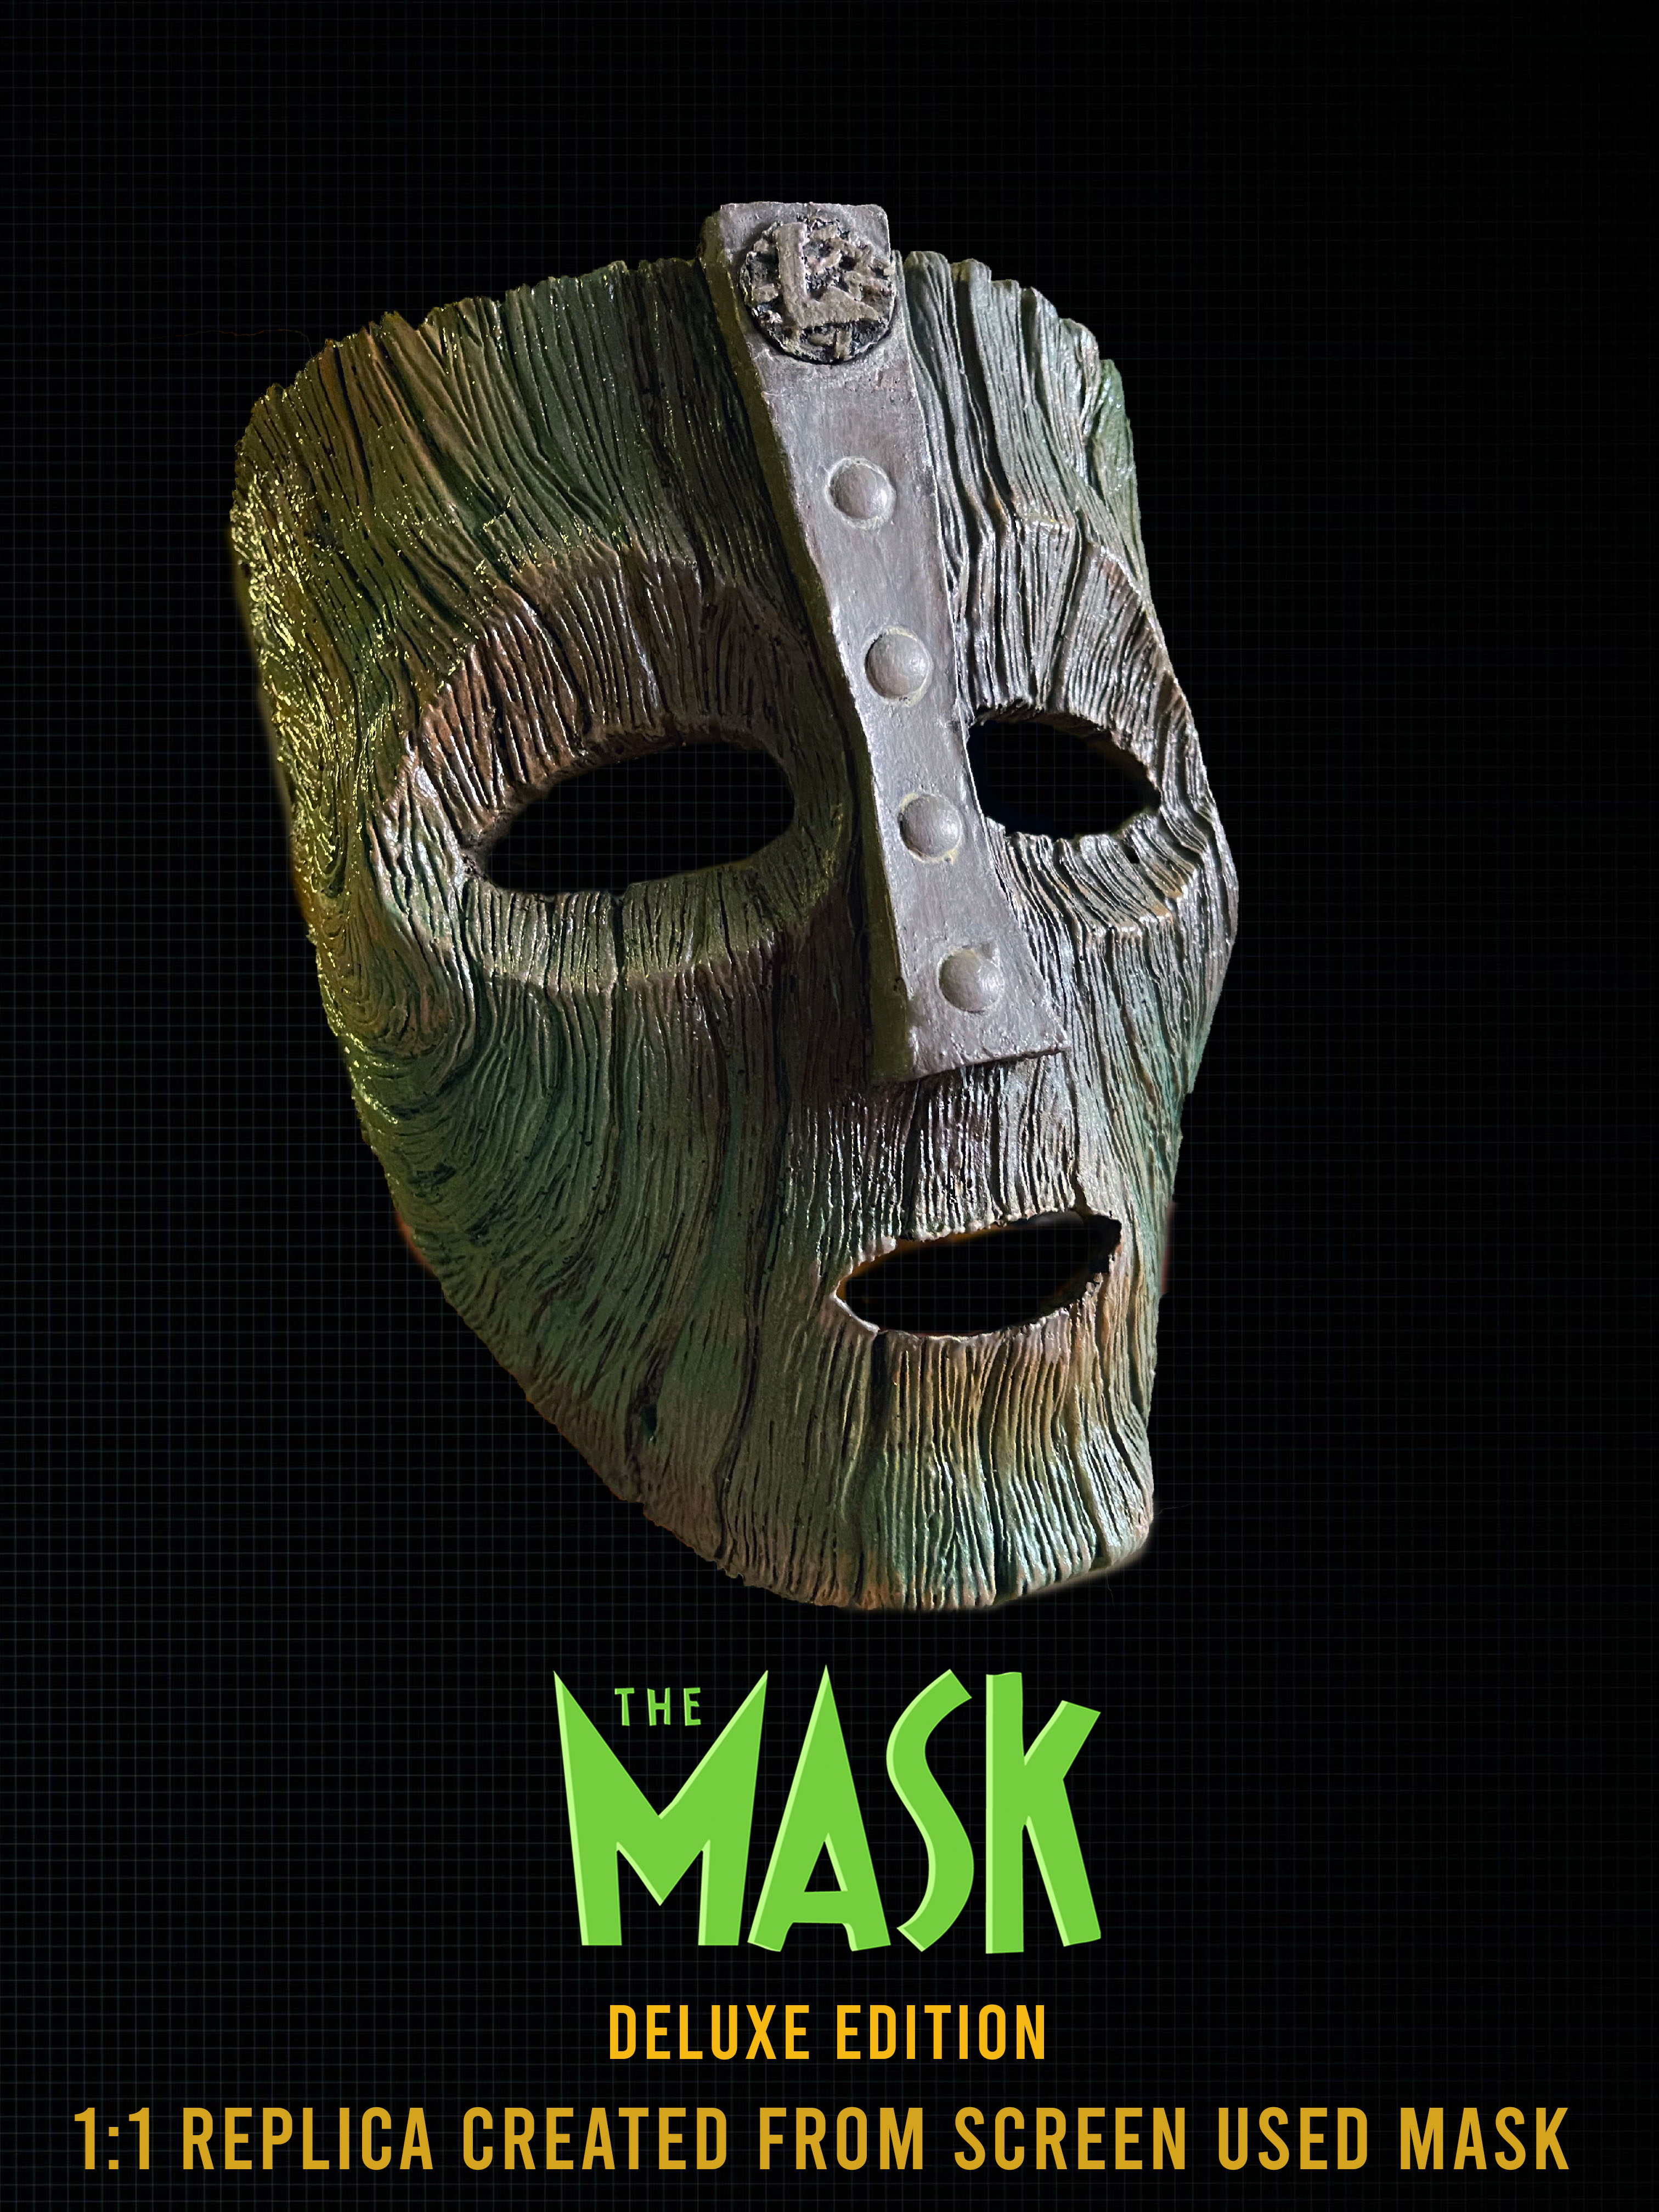 The mask cast